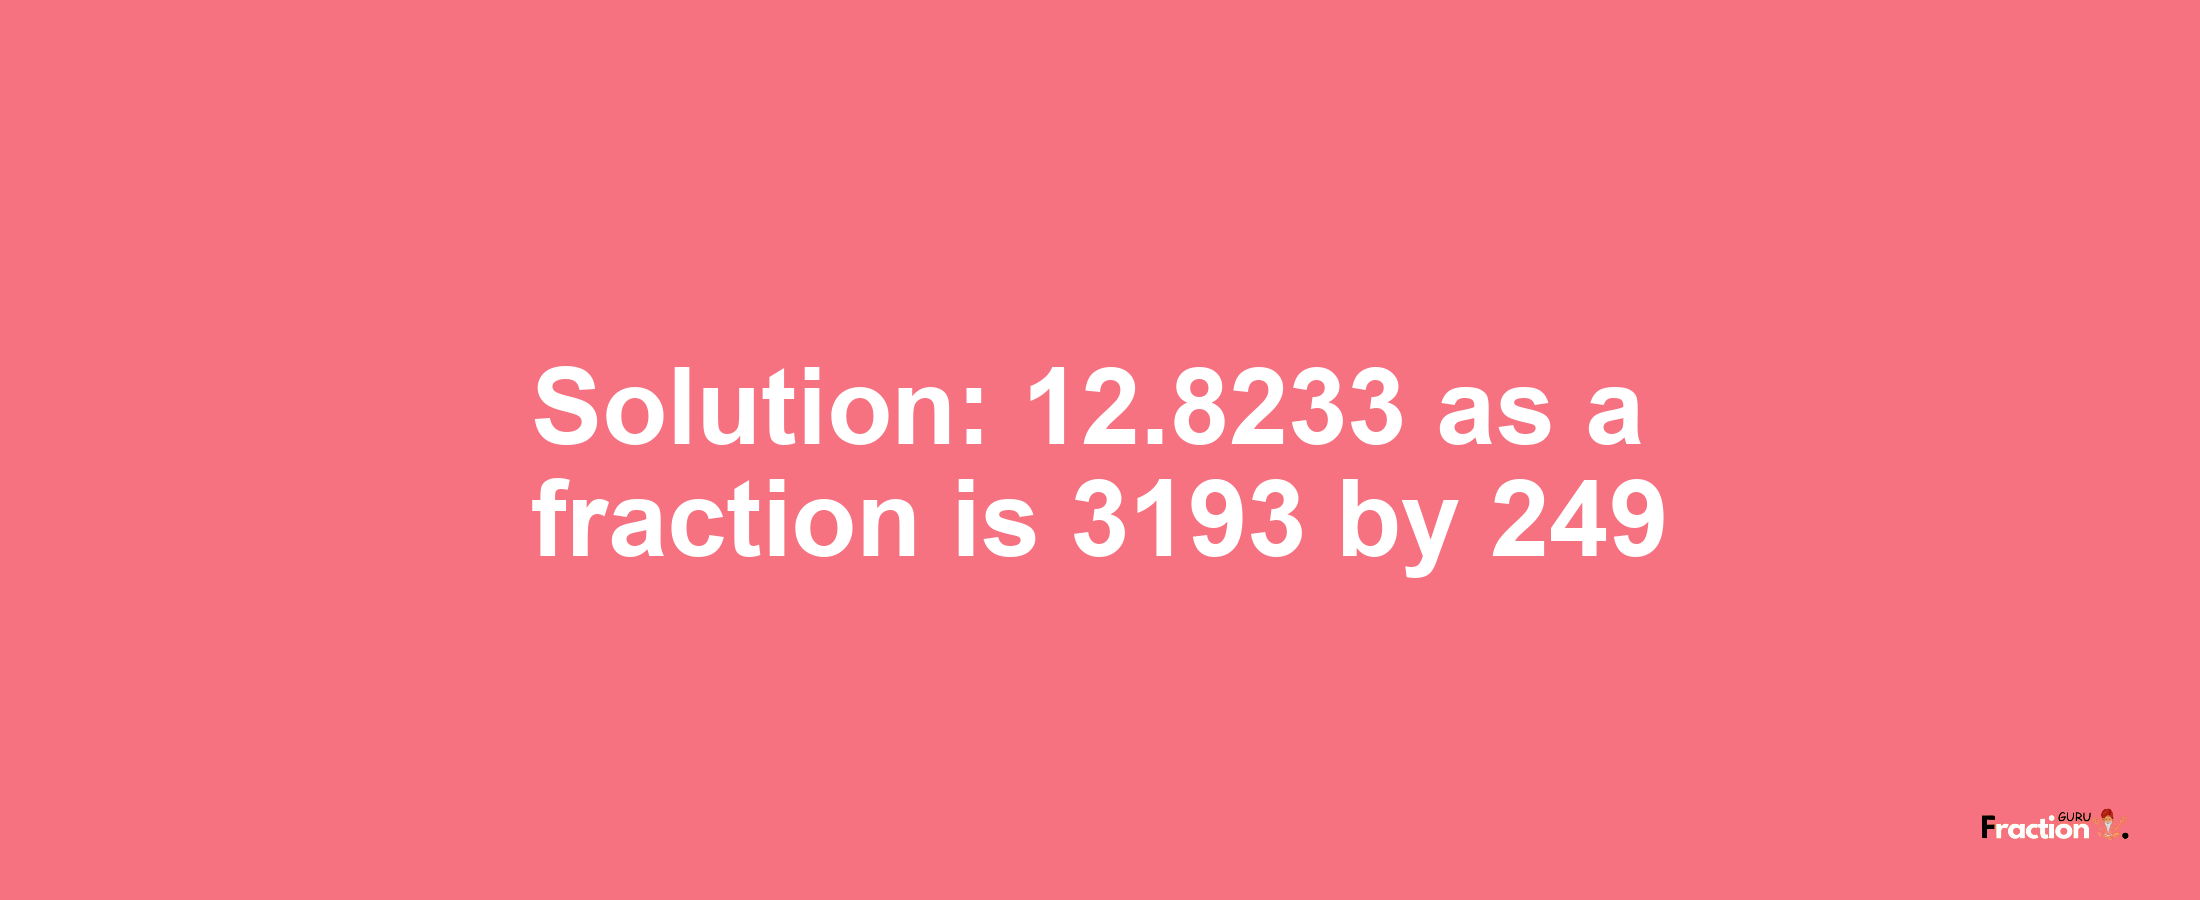 Solution:12.8233 as a fraction is 3193/249